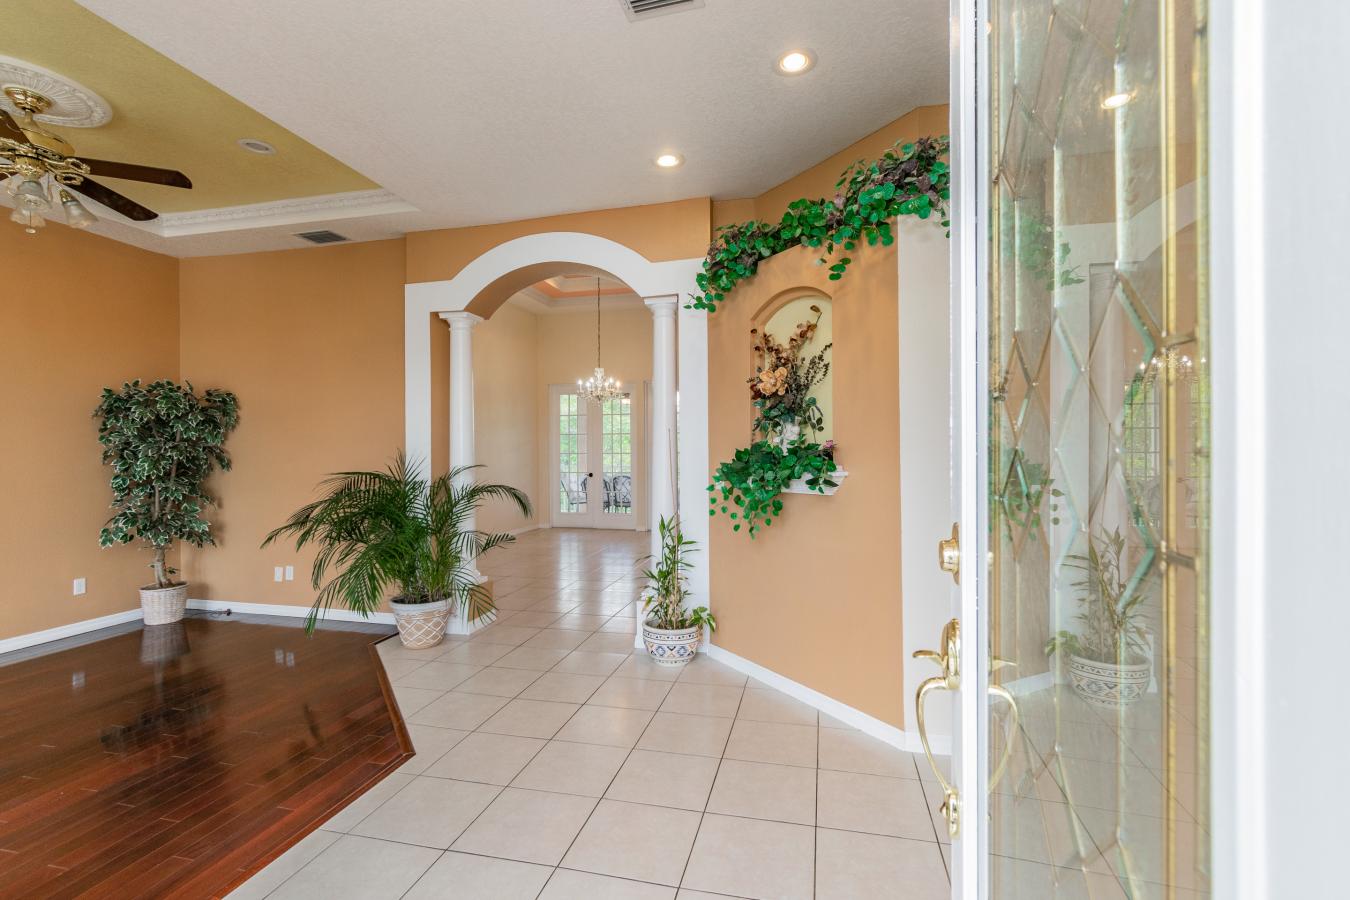 3187 Shoreline Drive, Clearwater, Florida, 33760, United States, 5 Bedrooms Bedrooms, ,3 BathroomsBathrooms,Residential,For Sale,3187 Shoreline Drive,794467